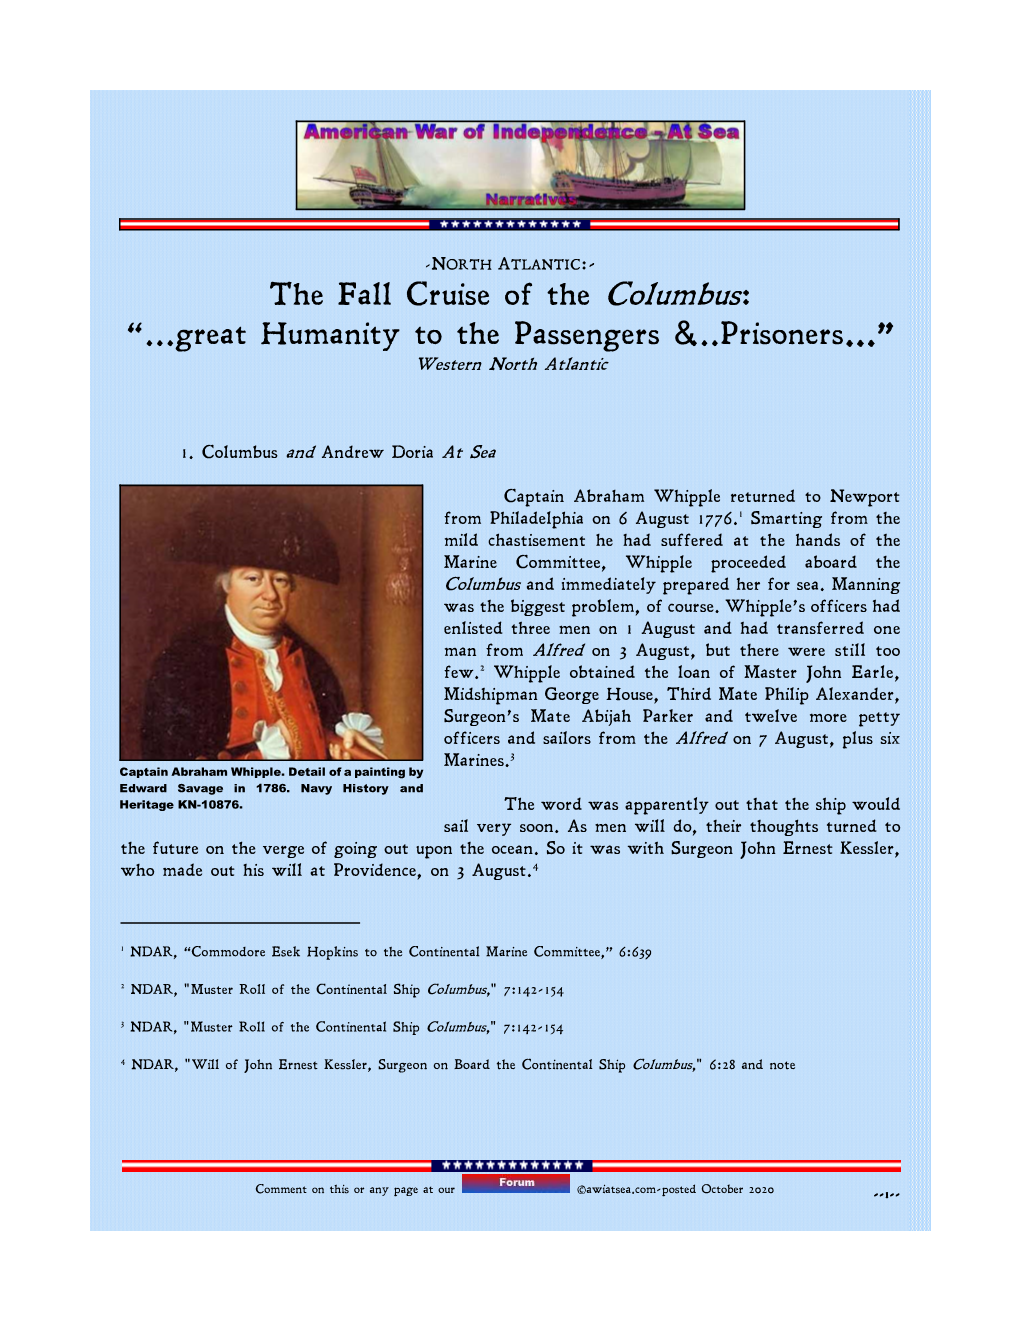 The Fall Cruise of the Columbus : “...Great Humanity to the Passengers & ...Prisoners ...” Western North Atlantic